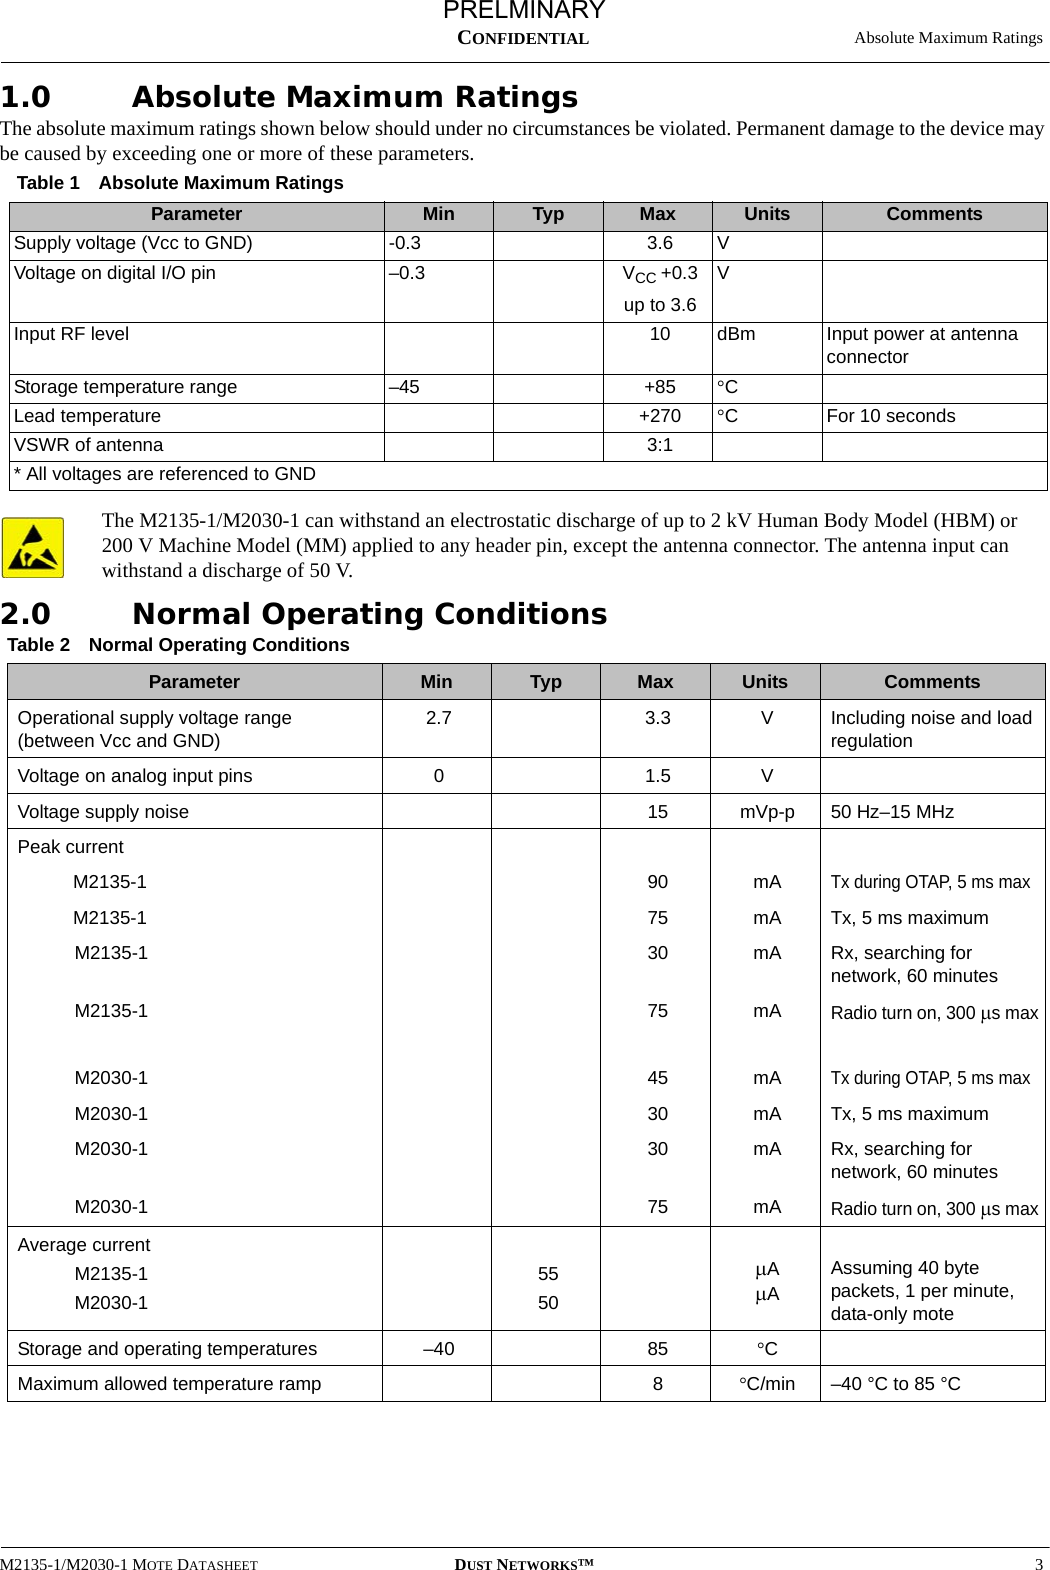   Absolute Maximum RatingsM2135-1/M2030-1 MOTE DATASHEET DUST NETWORKS™3CONFIDENTIAL1.0 Absolute Maximum RatingsThe absolute maximum ratings shown below should under no circumstances be violated. Permanent damage to the device may be caused by exceeding one or more of these parameters. The M2135-1/M2030-1 can withstand an electrostatic discharge of up to 2 kV Human Body Model (HBM) or 200 V Machine Model (MM) applied to any header pin, except the antenna connector. The antenna input can withstand a discharge of 50 V.2.0 Normal Operating ConditionsTable 1 Absolute Maximum RatingsParameter Min Typ Max Units CommentsSupply voltage (Vcc to GND) -0.3 3.6 VVoltage on digital I/O pin –0.3 VCC +0.3up to 3.6 VInput RF level 10 dBm Input power at antenna connectorStorage temperature range –45 +85 °CLead temperature +270 °CFor 10 secondsVSWR of antenna 3:1* All voltages are referenced to GNDTable 2 Normal Operating ConditionsParameter Min Typ Max Units CommentsOperational supply voltage range  (between Vcc and GND)2.7 3.3 VIncluding noise and load regulationVoltage on analog input pins 01.5 VVoltage supply noise 15 mVp-p 50 Hz–15 MHzPeak currentM2135-1 90 mATx during OTAP, 5 ms maxM2135-1 75 mA Tx, 5 ms maximumM2135-1 30 mA Rx, searching for network, 60 minutesM2135-1 75 mARadio turn on, 300 µs maxM2030-1 45 mATx during OTAP, 5 ms maxM2030-1 30 mA Tx, 5 ms maximumM2030-1 30 mA Rx, searching for network, 60 minutesM2030-1 75 mARadio turn on, 300 µs maxAverage currentM2135-1M2030-15550µAµA Assuming 40 byte packets, 1 per minute, data-only moteStorage and operating temperatures –40 85 °CMaximum allowed temperature ramp 8°C/min –40 °C to 85 °CPRELMINARY